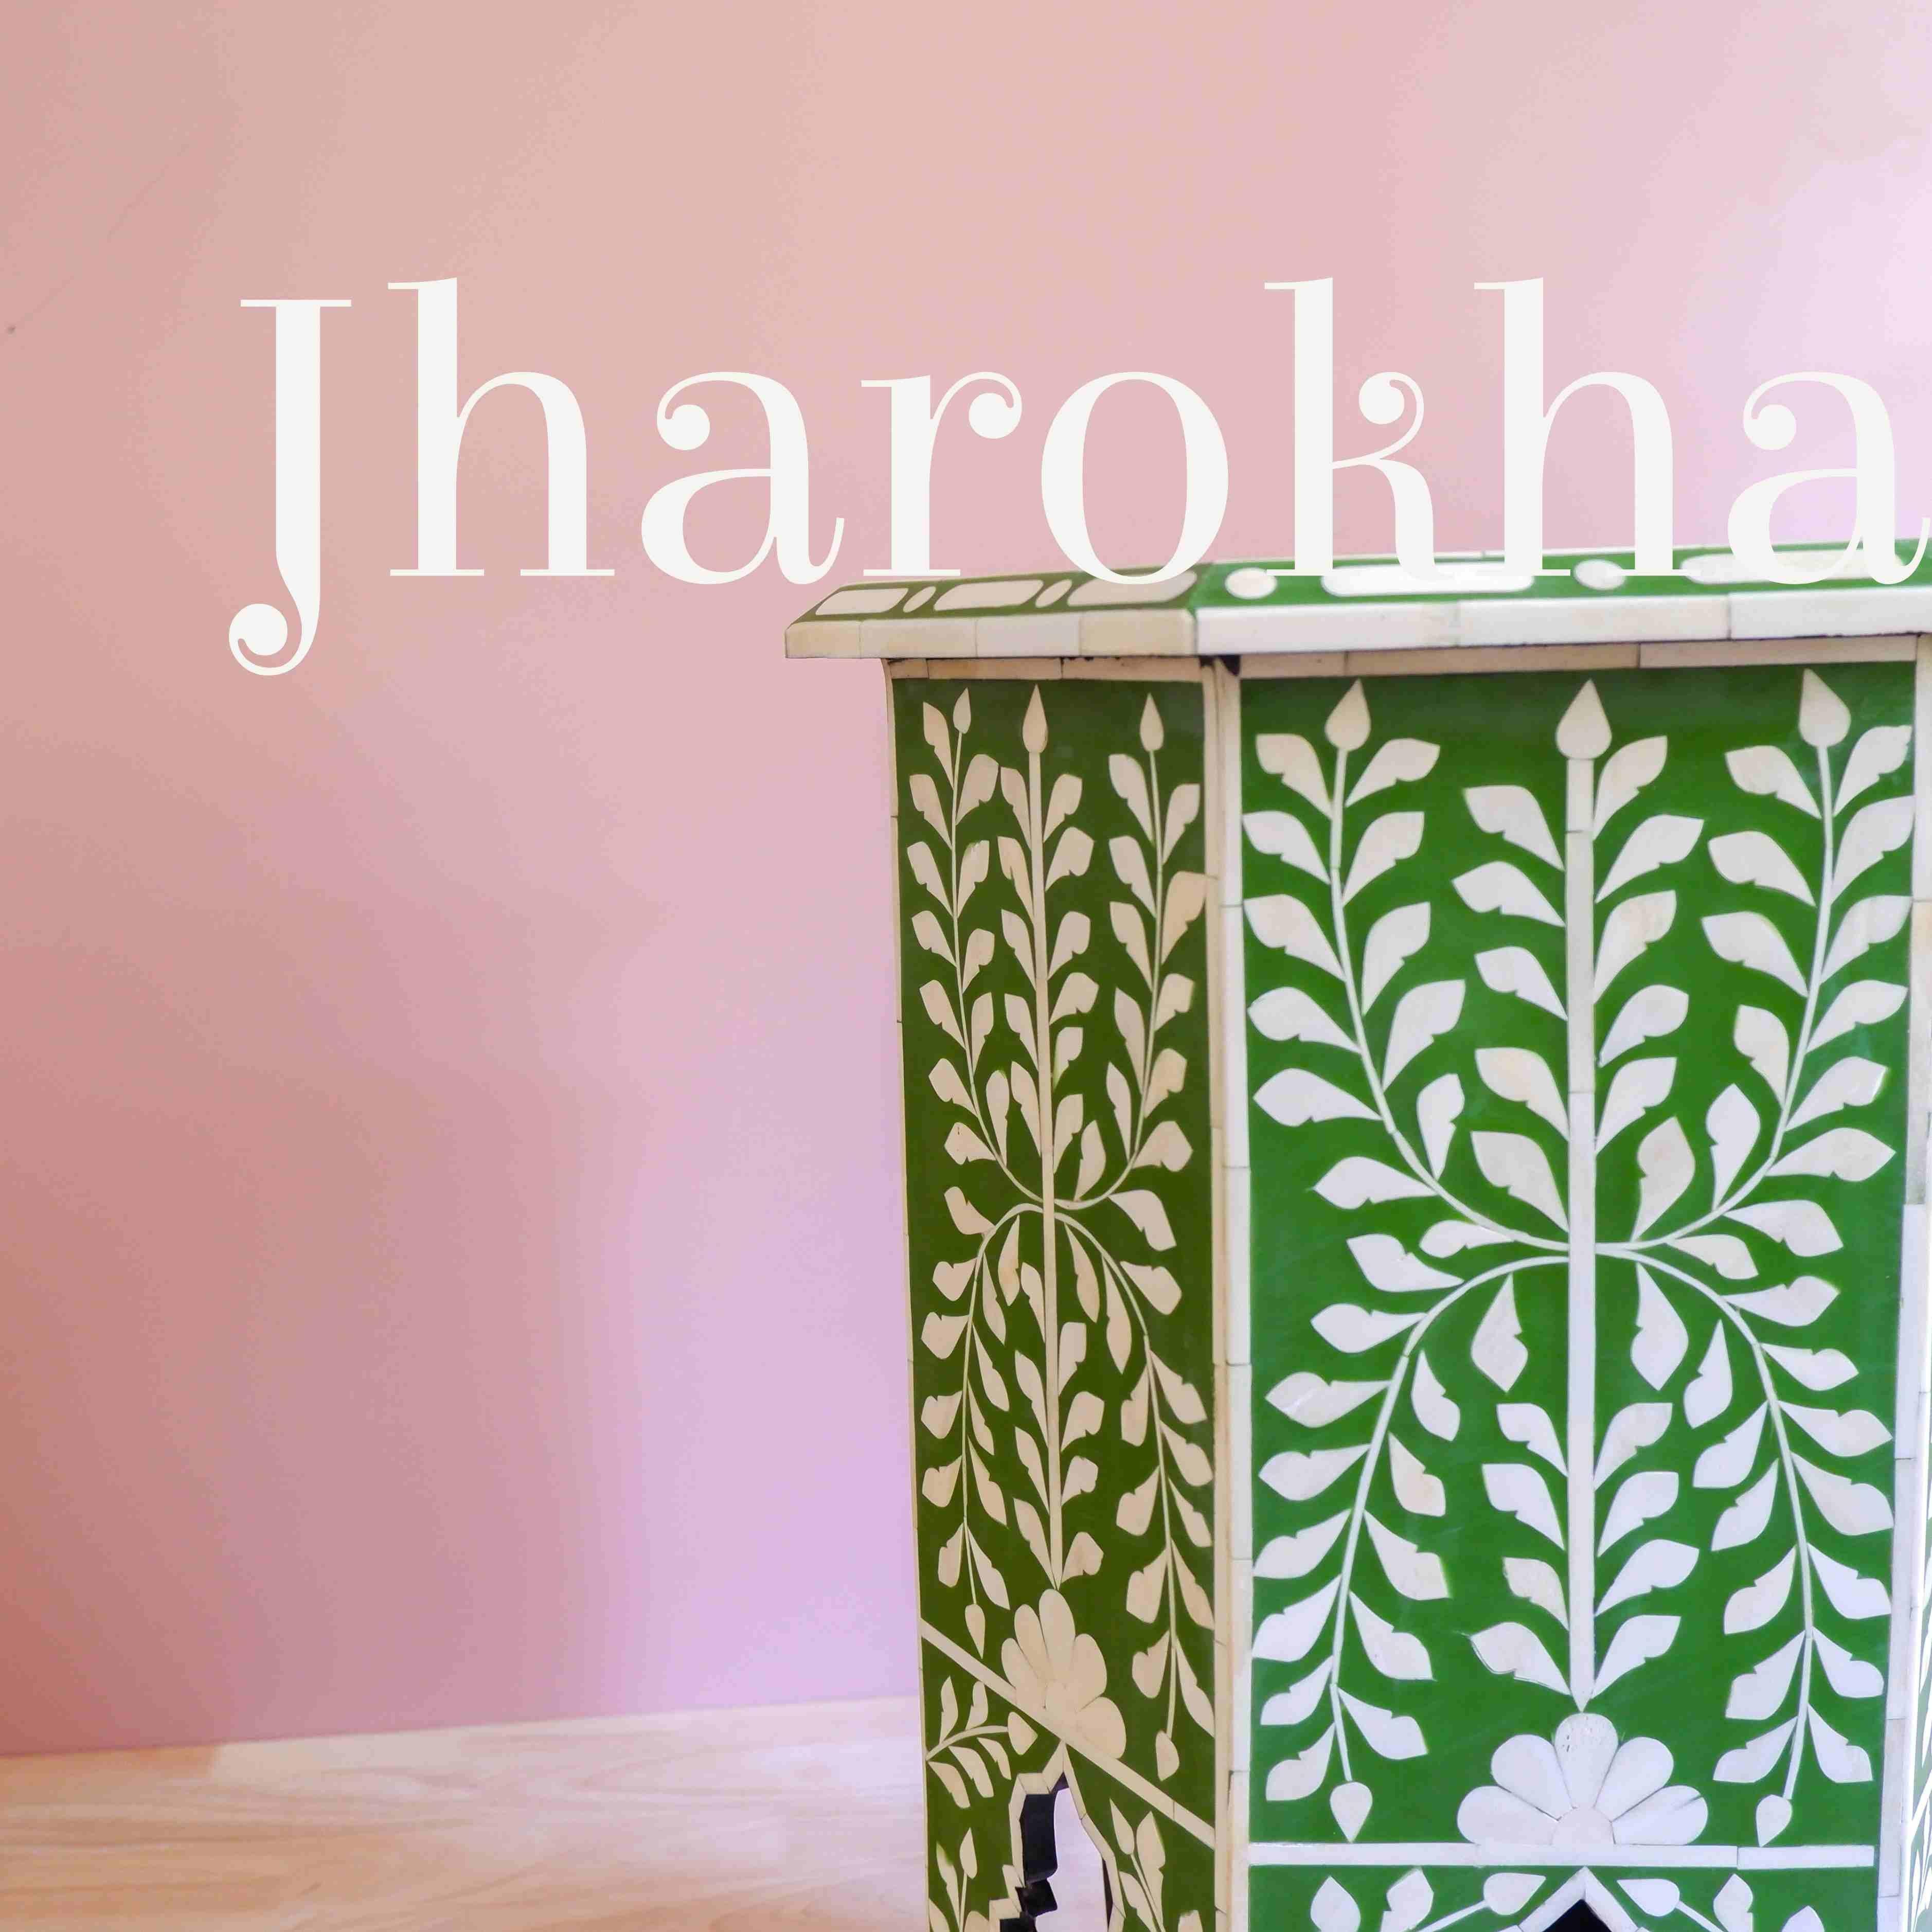 Step into the majestic world of ancient Indian palaces with our exquisite Jharokha Green Bone Inlay End Table. Inspired by the intricate and ornate jharokhas, or balcony windows, this end table features a mesmerizing design crafted using small